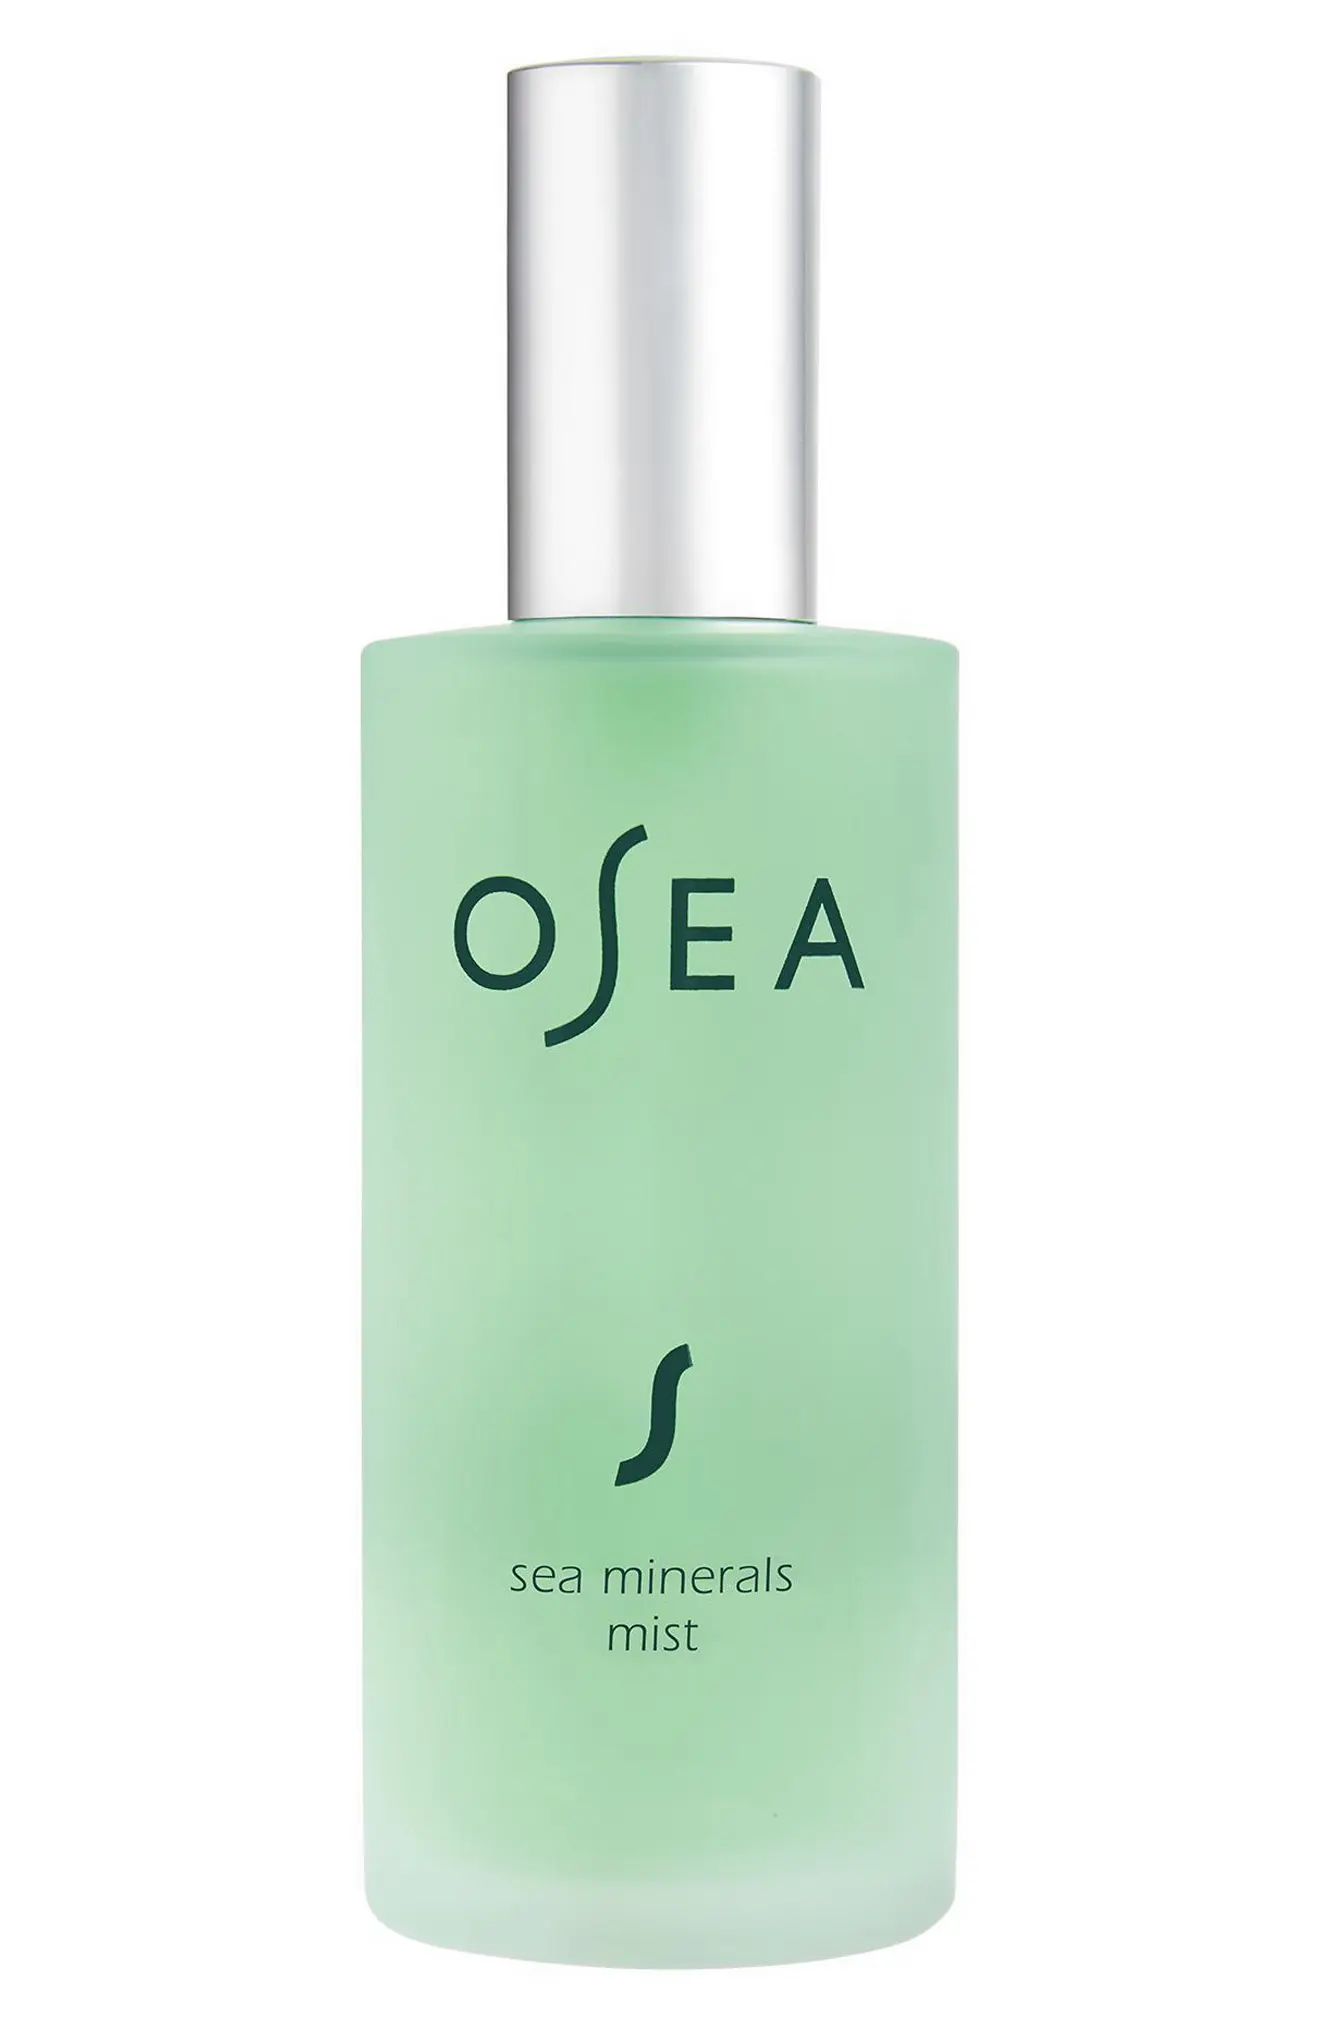 OSEA Sea Minerals Mist at Nordstrom, Size 3.4 Oz | Nordstrom